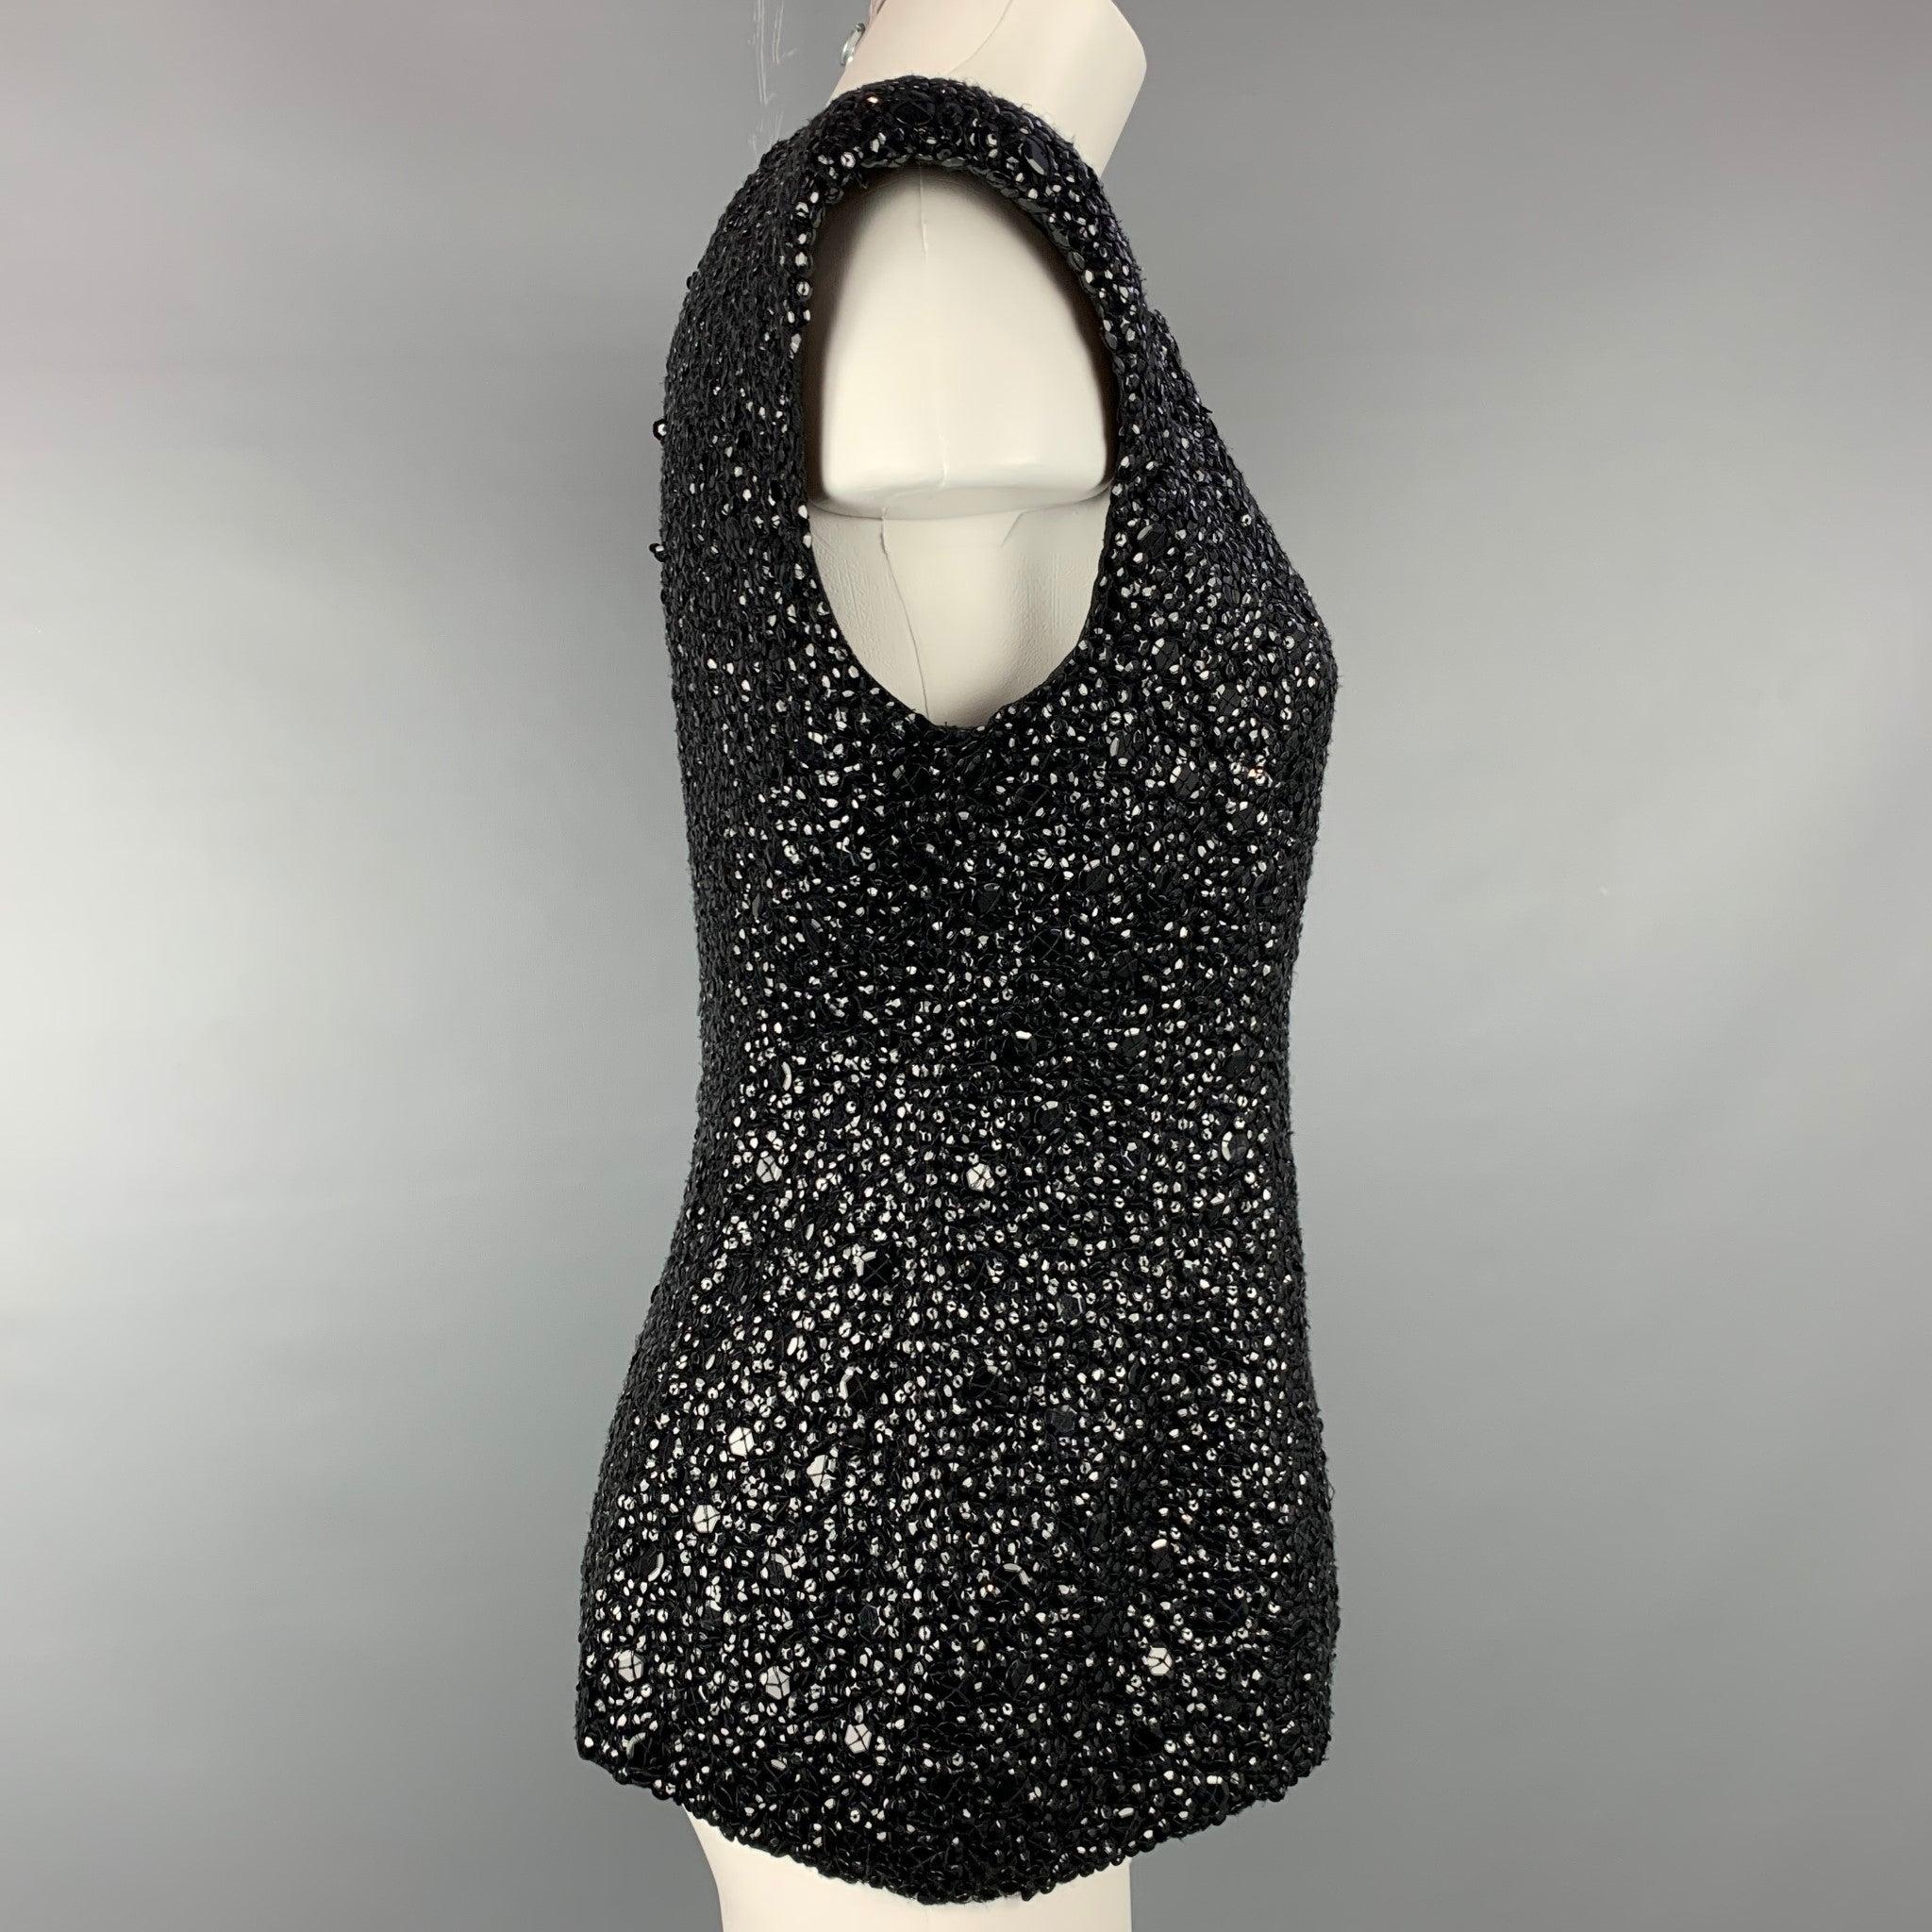 DRIES VAN NOTEN Size 6 Black Sequined Textured Viscose Dress Top In Good Condition For Sale In San Francisco, CA